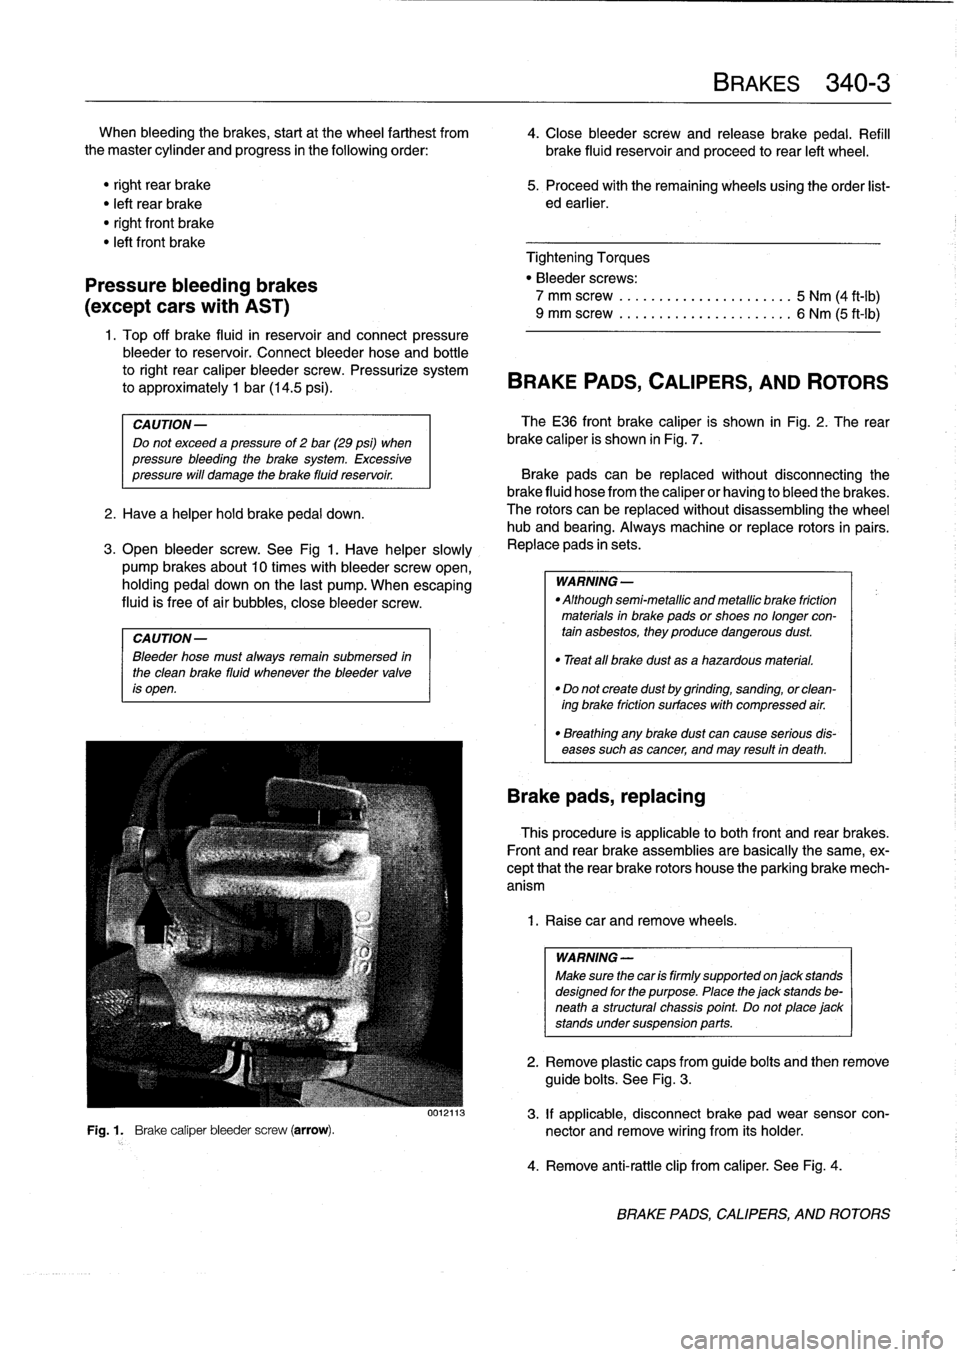 BMW 328i 1995 E36 Workshop Manual 
When
bleeding
the
brakes,
startat
the
wheel
farthest
from

	

4
.
Close
bleeder
screw
and
release
brake
pedal
.
Refill
the
master
cylinder
and
progress
in
the
following
order
:

	

brake
fluid
reserv